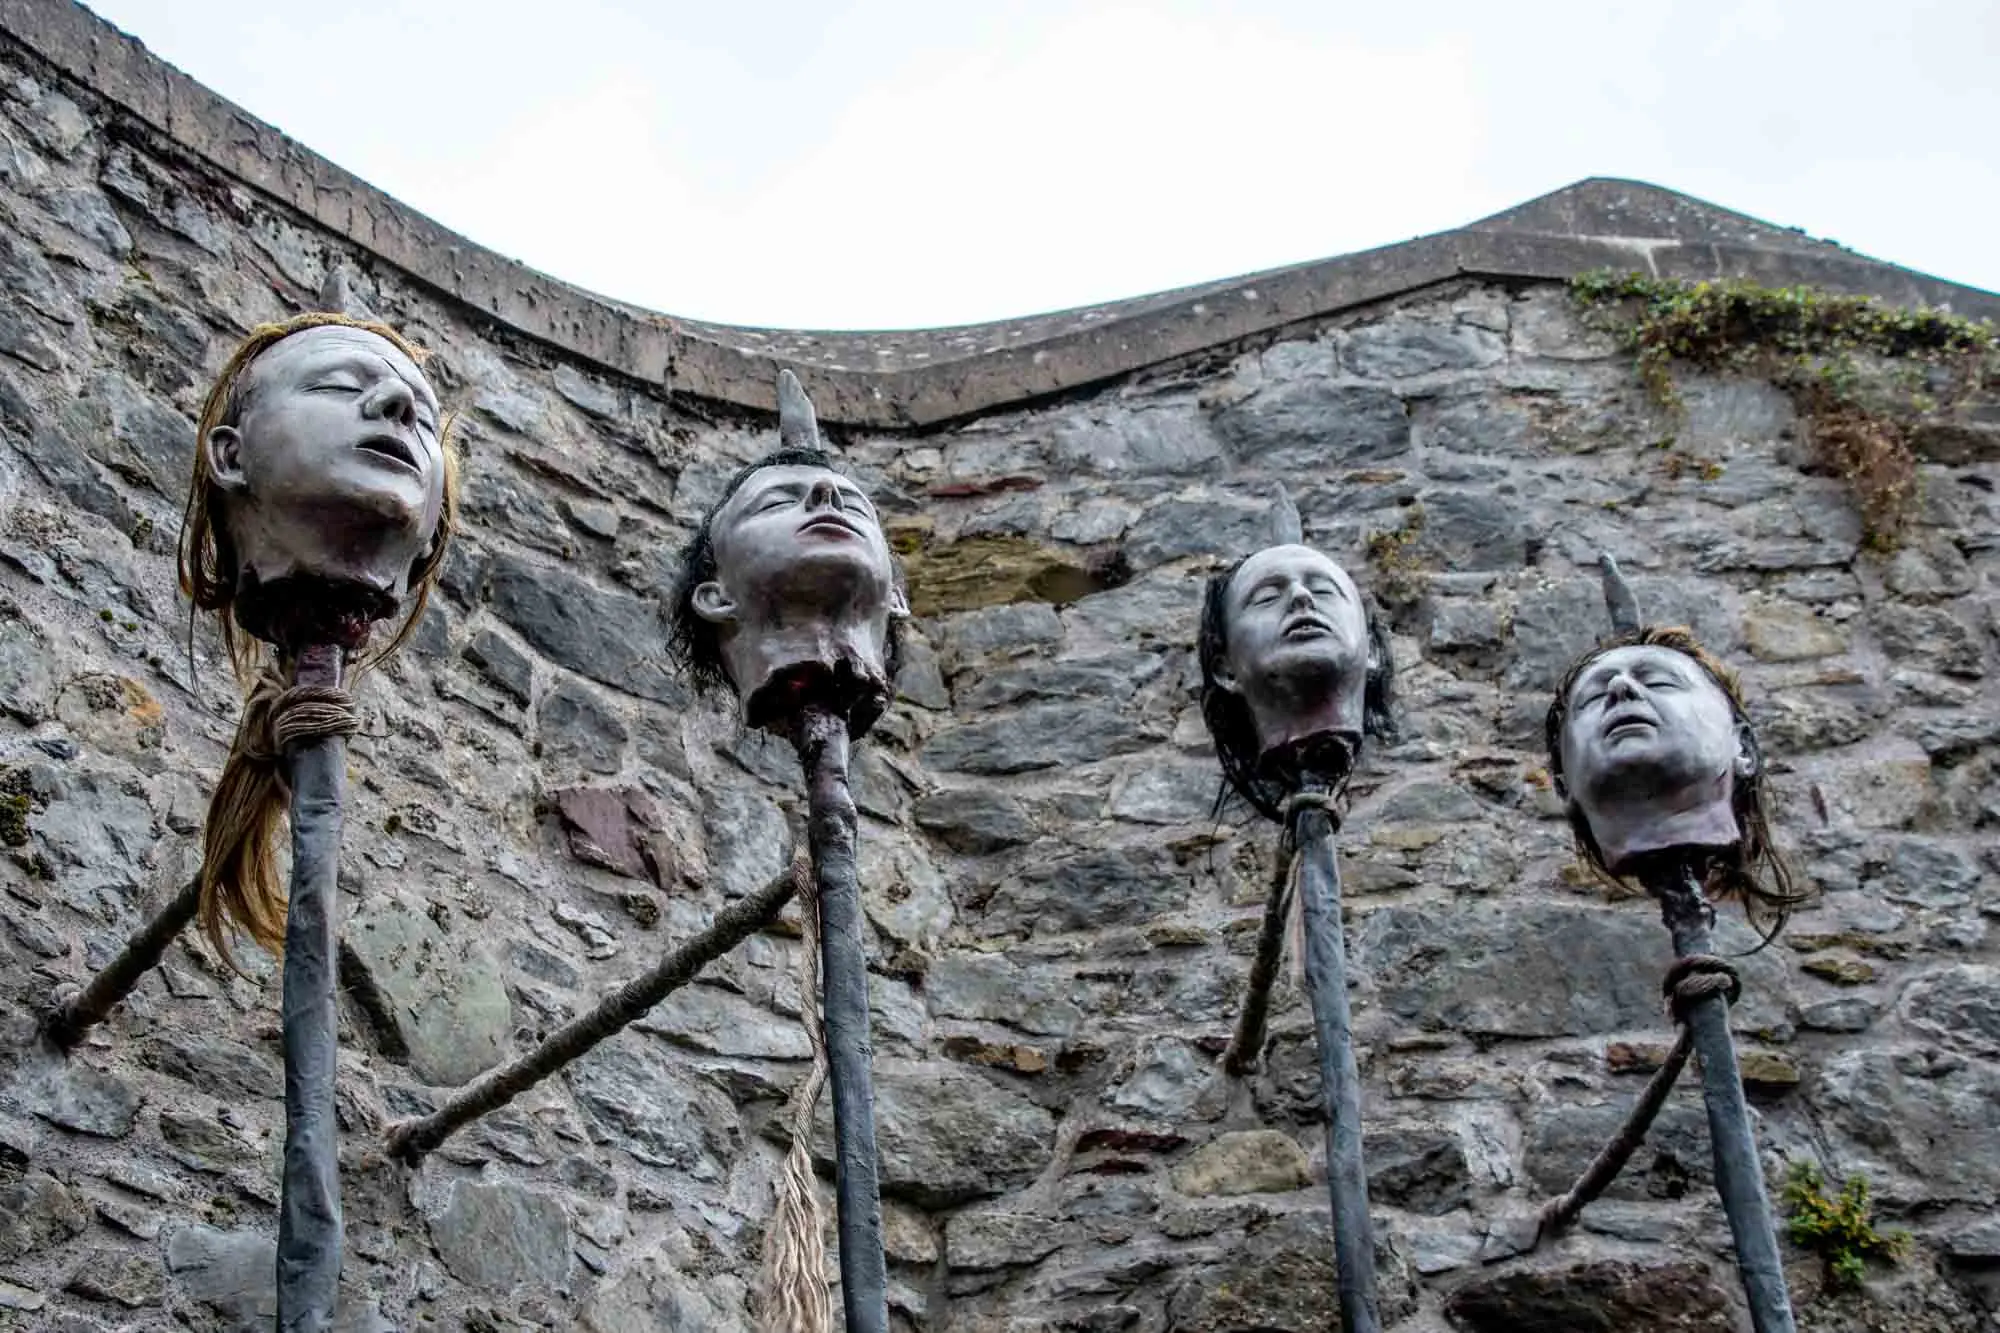 Four metal heads on spikes displayed in an ancient stone fort